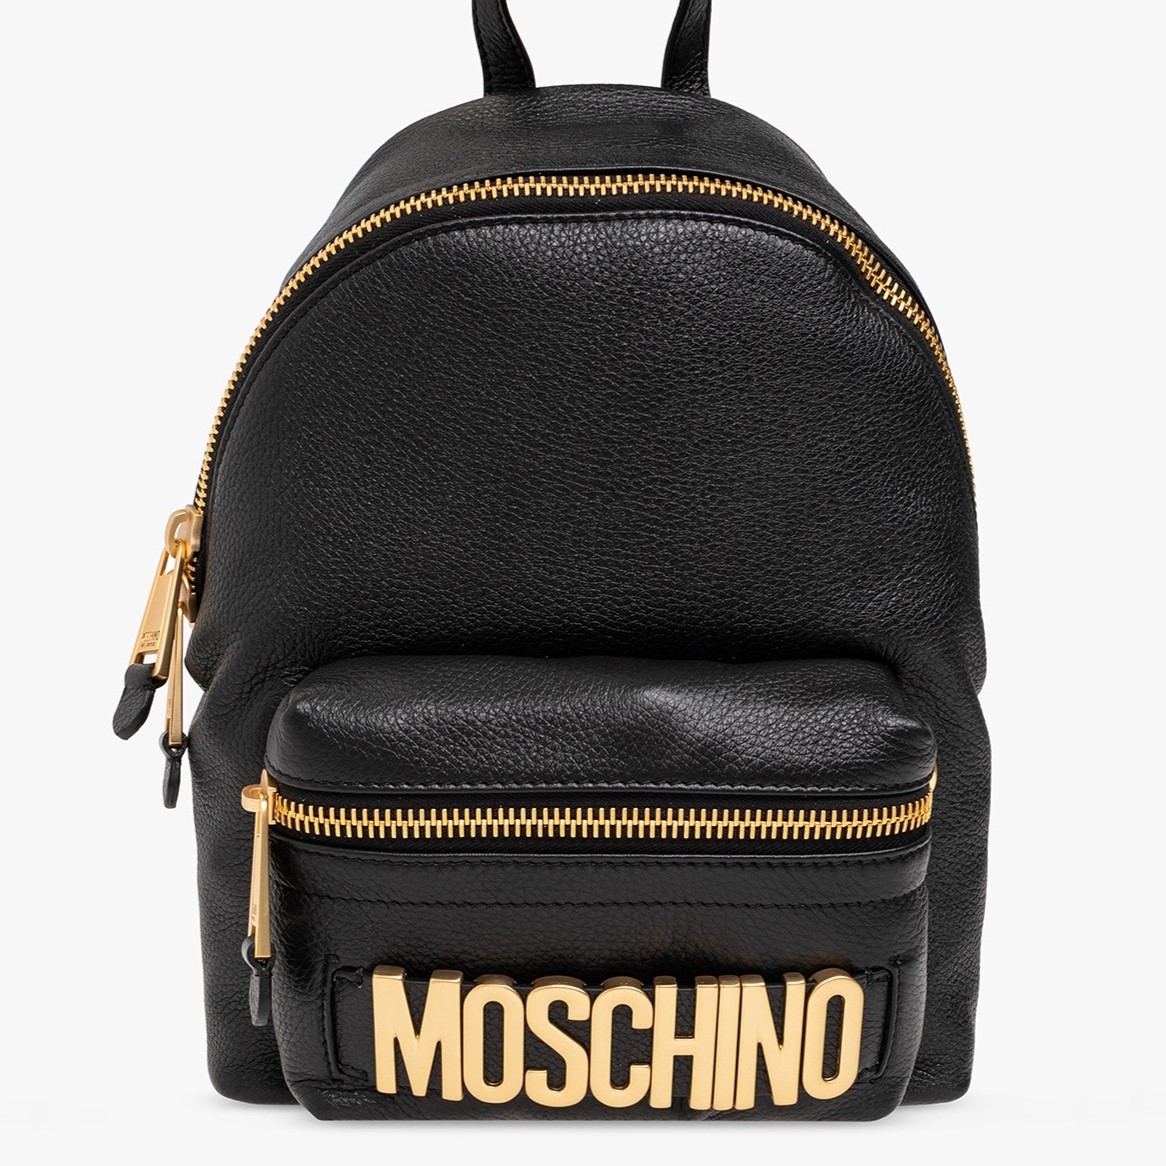 BALO NỮ MÀU ĐEN MOSCHINO BLACK LEATHER BACKPACK WITH LOGO 2